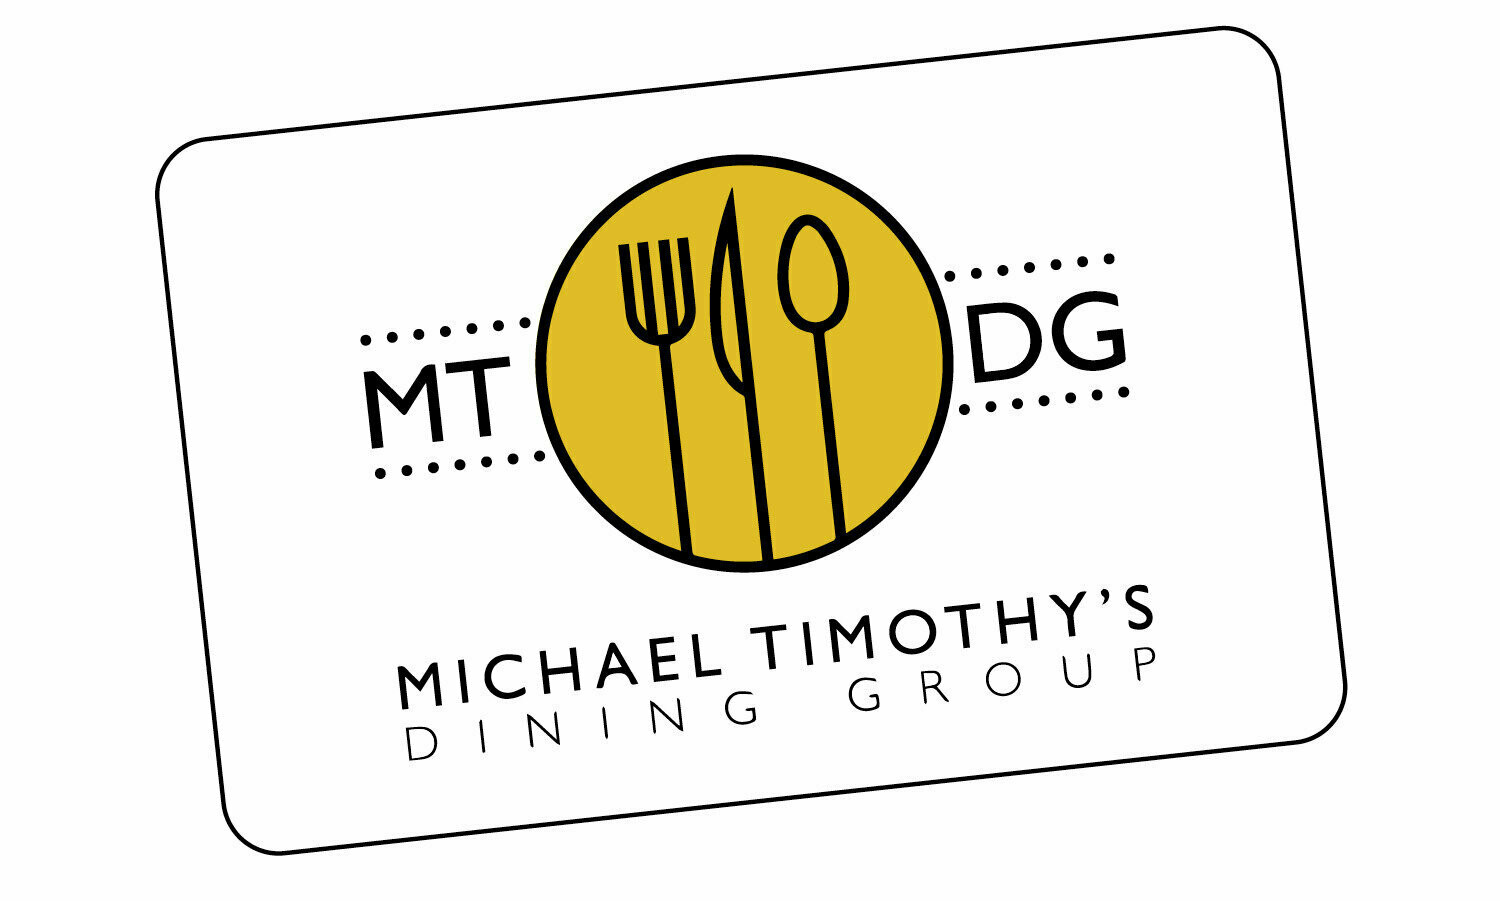 Michael Timothy's Dining Group - Gift Certificate